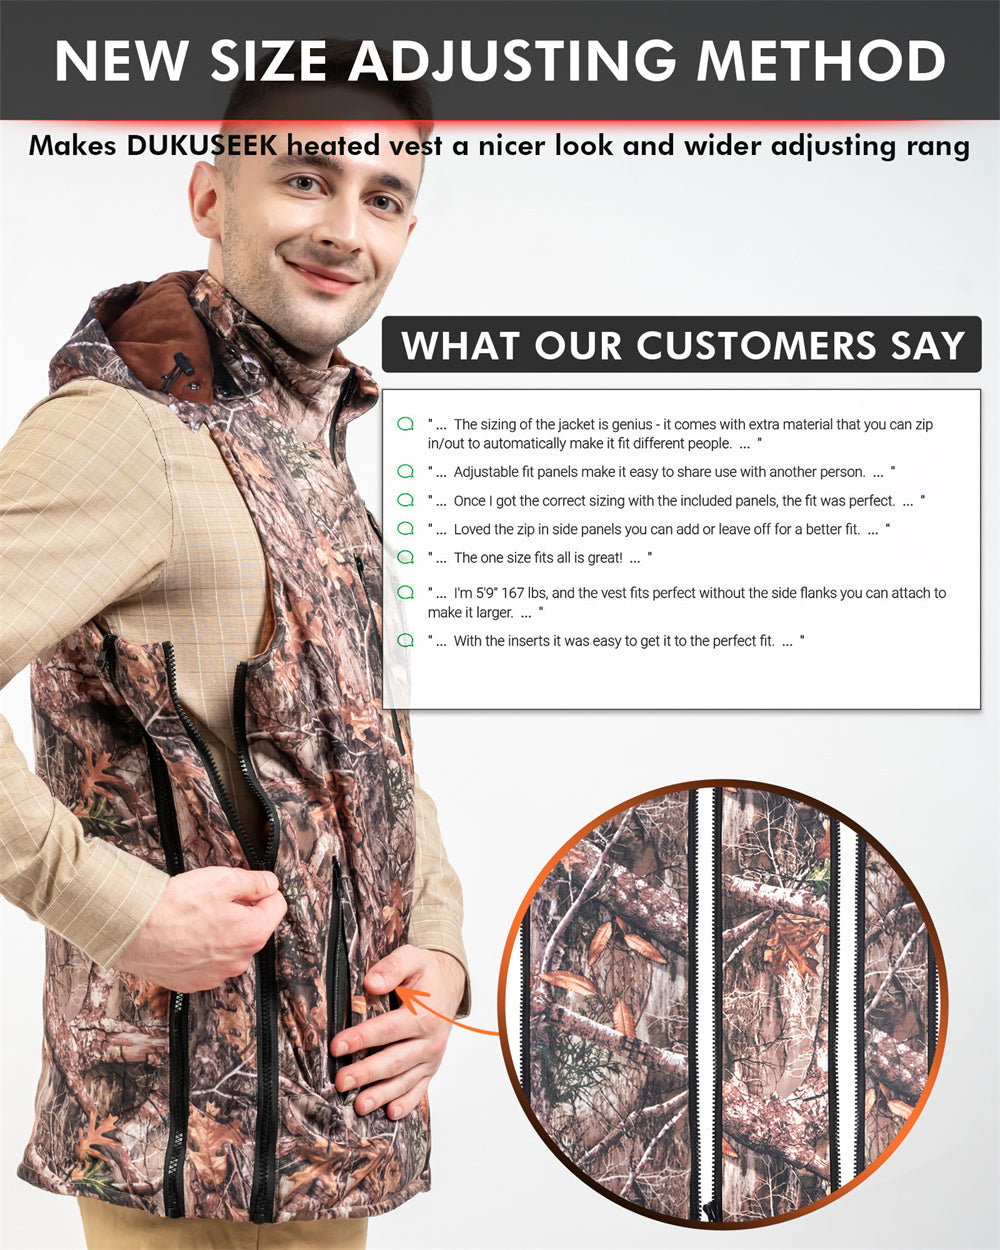 detachable size panels makes arris heated camo vest a nicer look and wider adjusting range